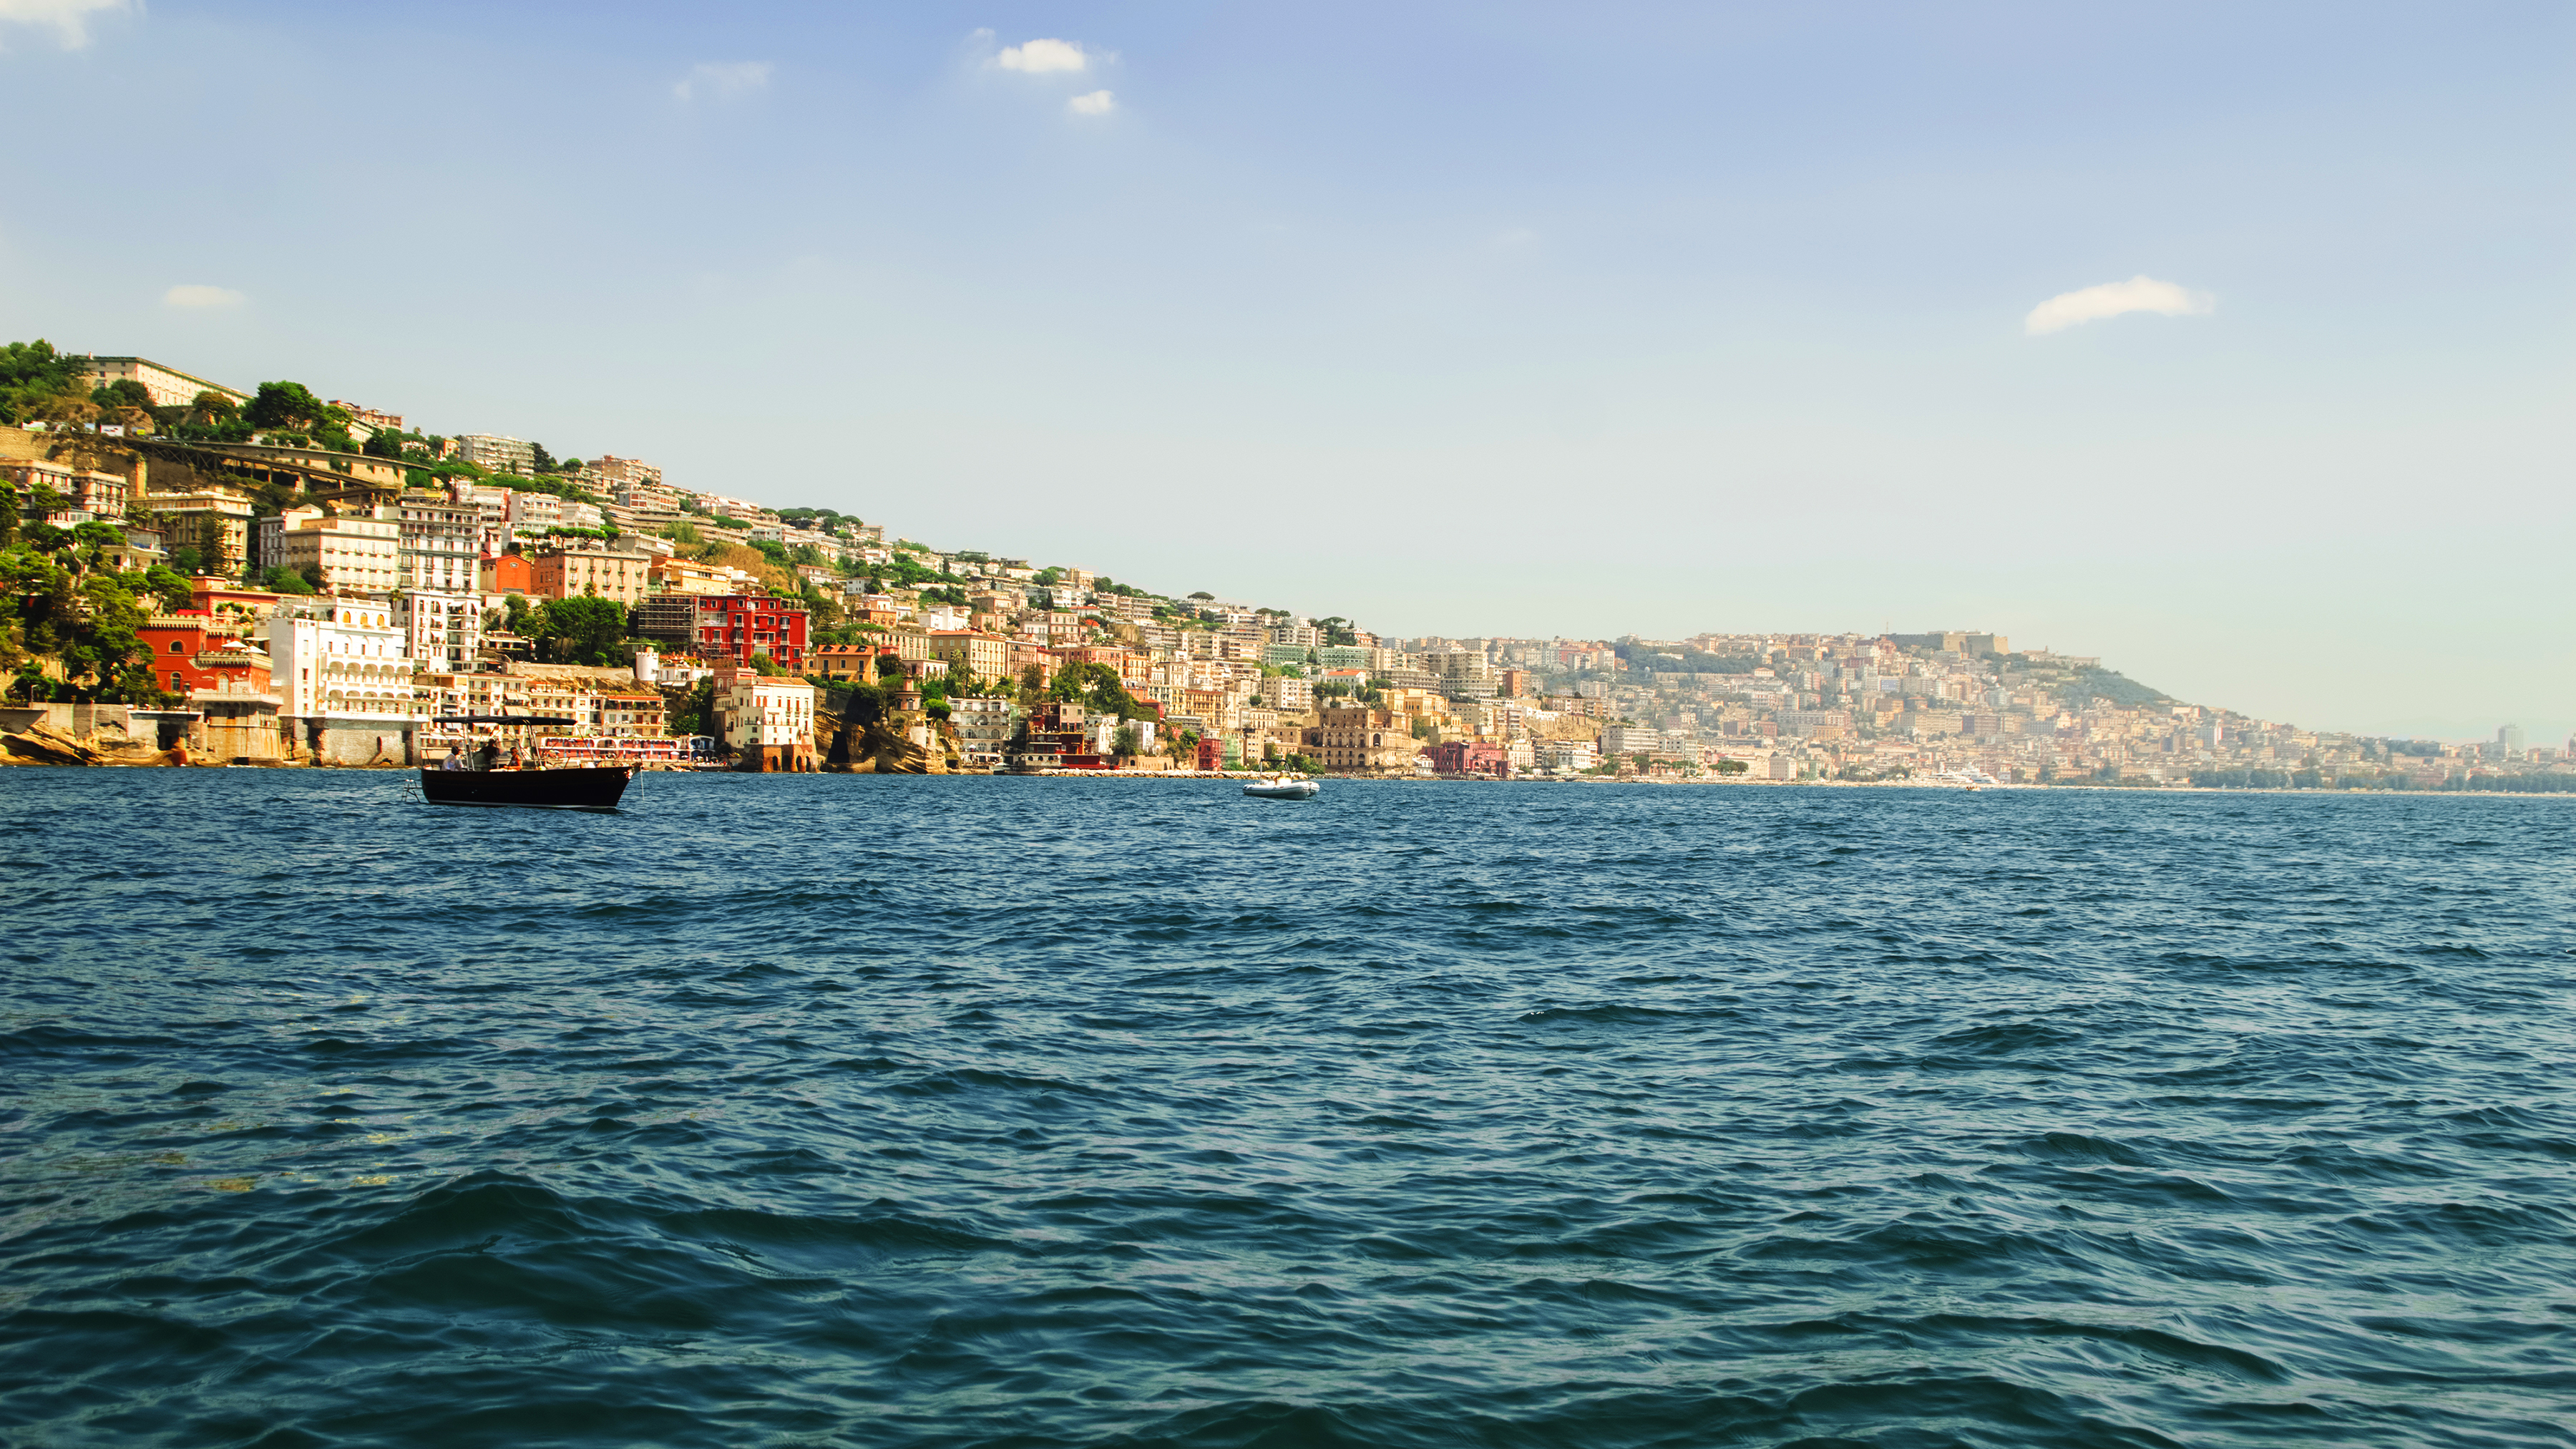 view-from-the-sea-of-posillipo-hill-naples-and-the-blue-waters-2